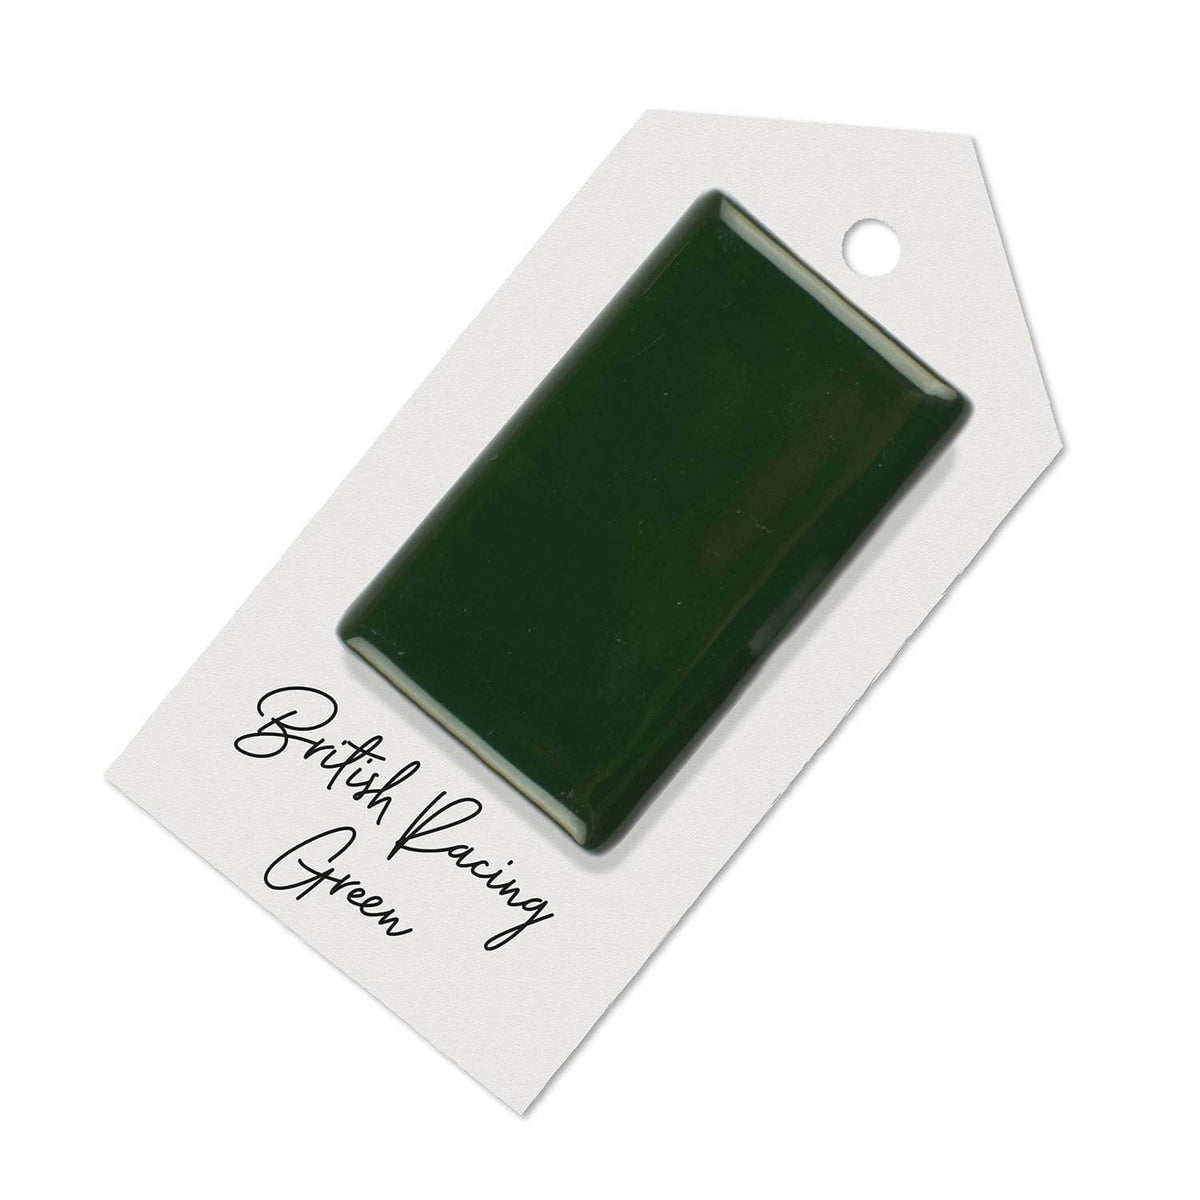 British Racing Green sample for Aga range cooker re-enamelling &amp; reconditioned cookers